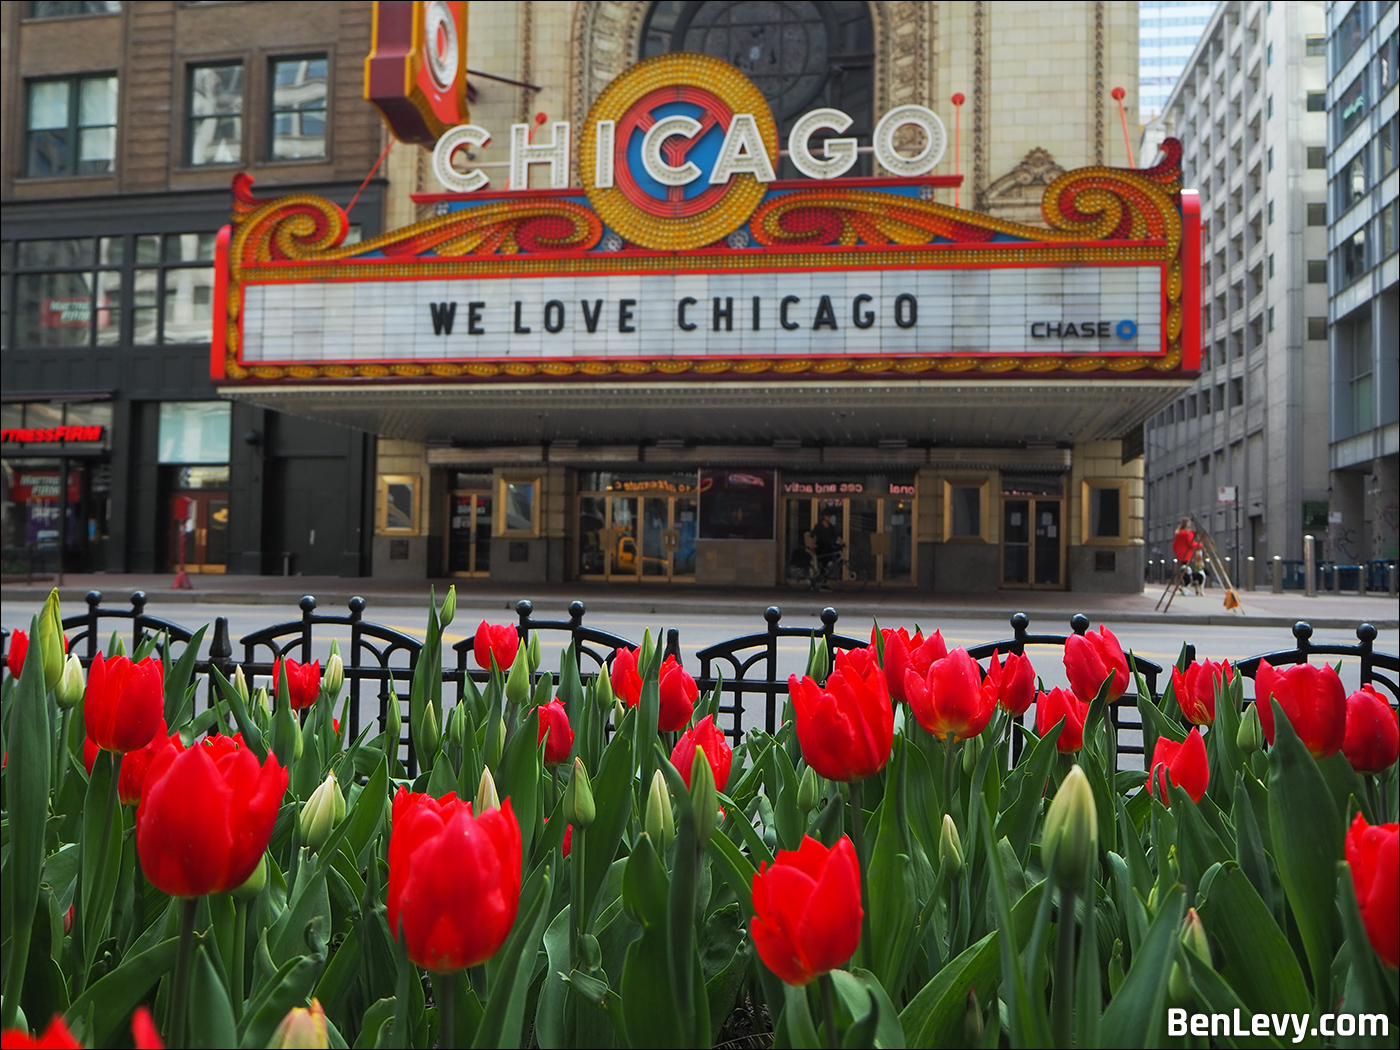 The Chicago Theater in Spring